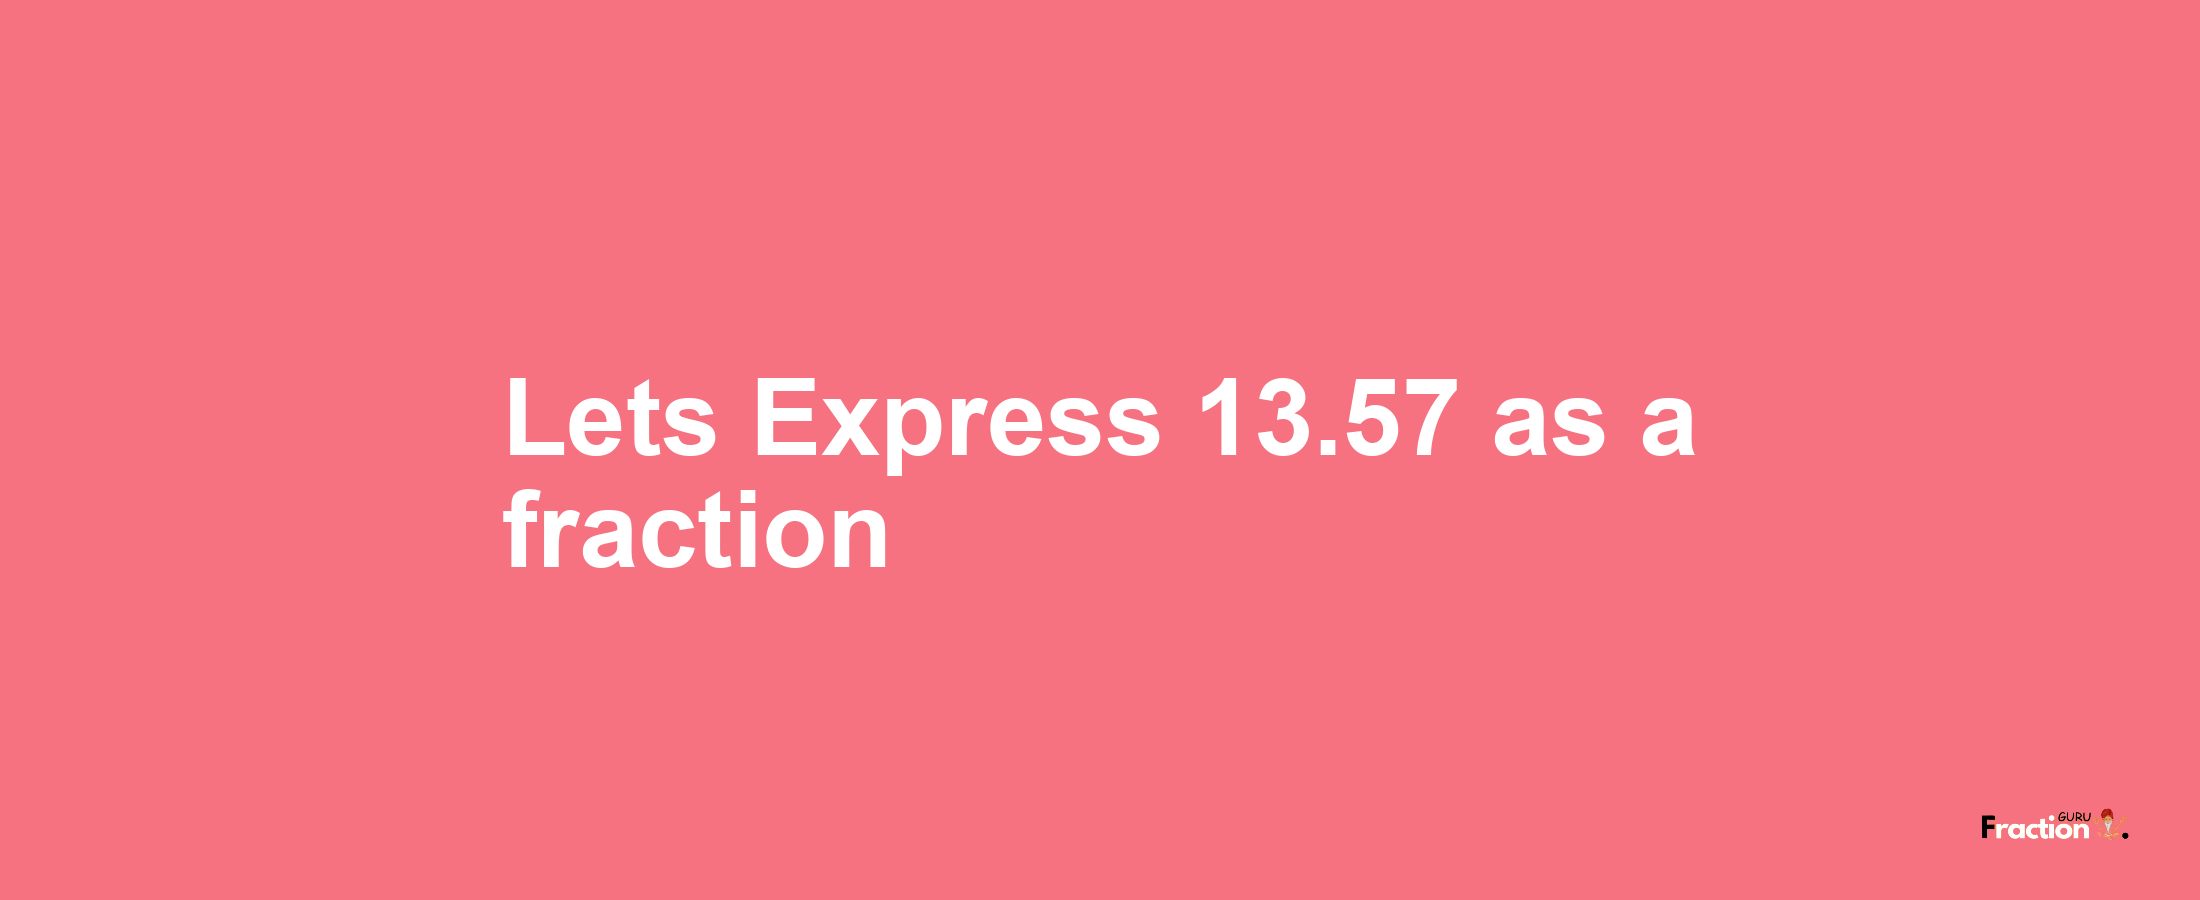 Lets Express 13.57 as afraction